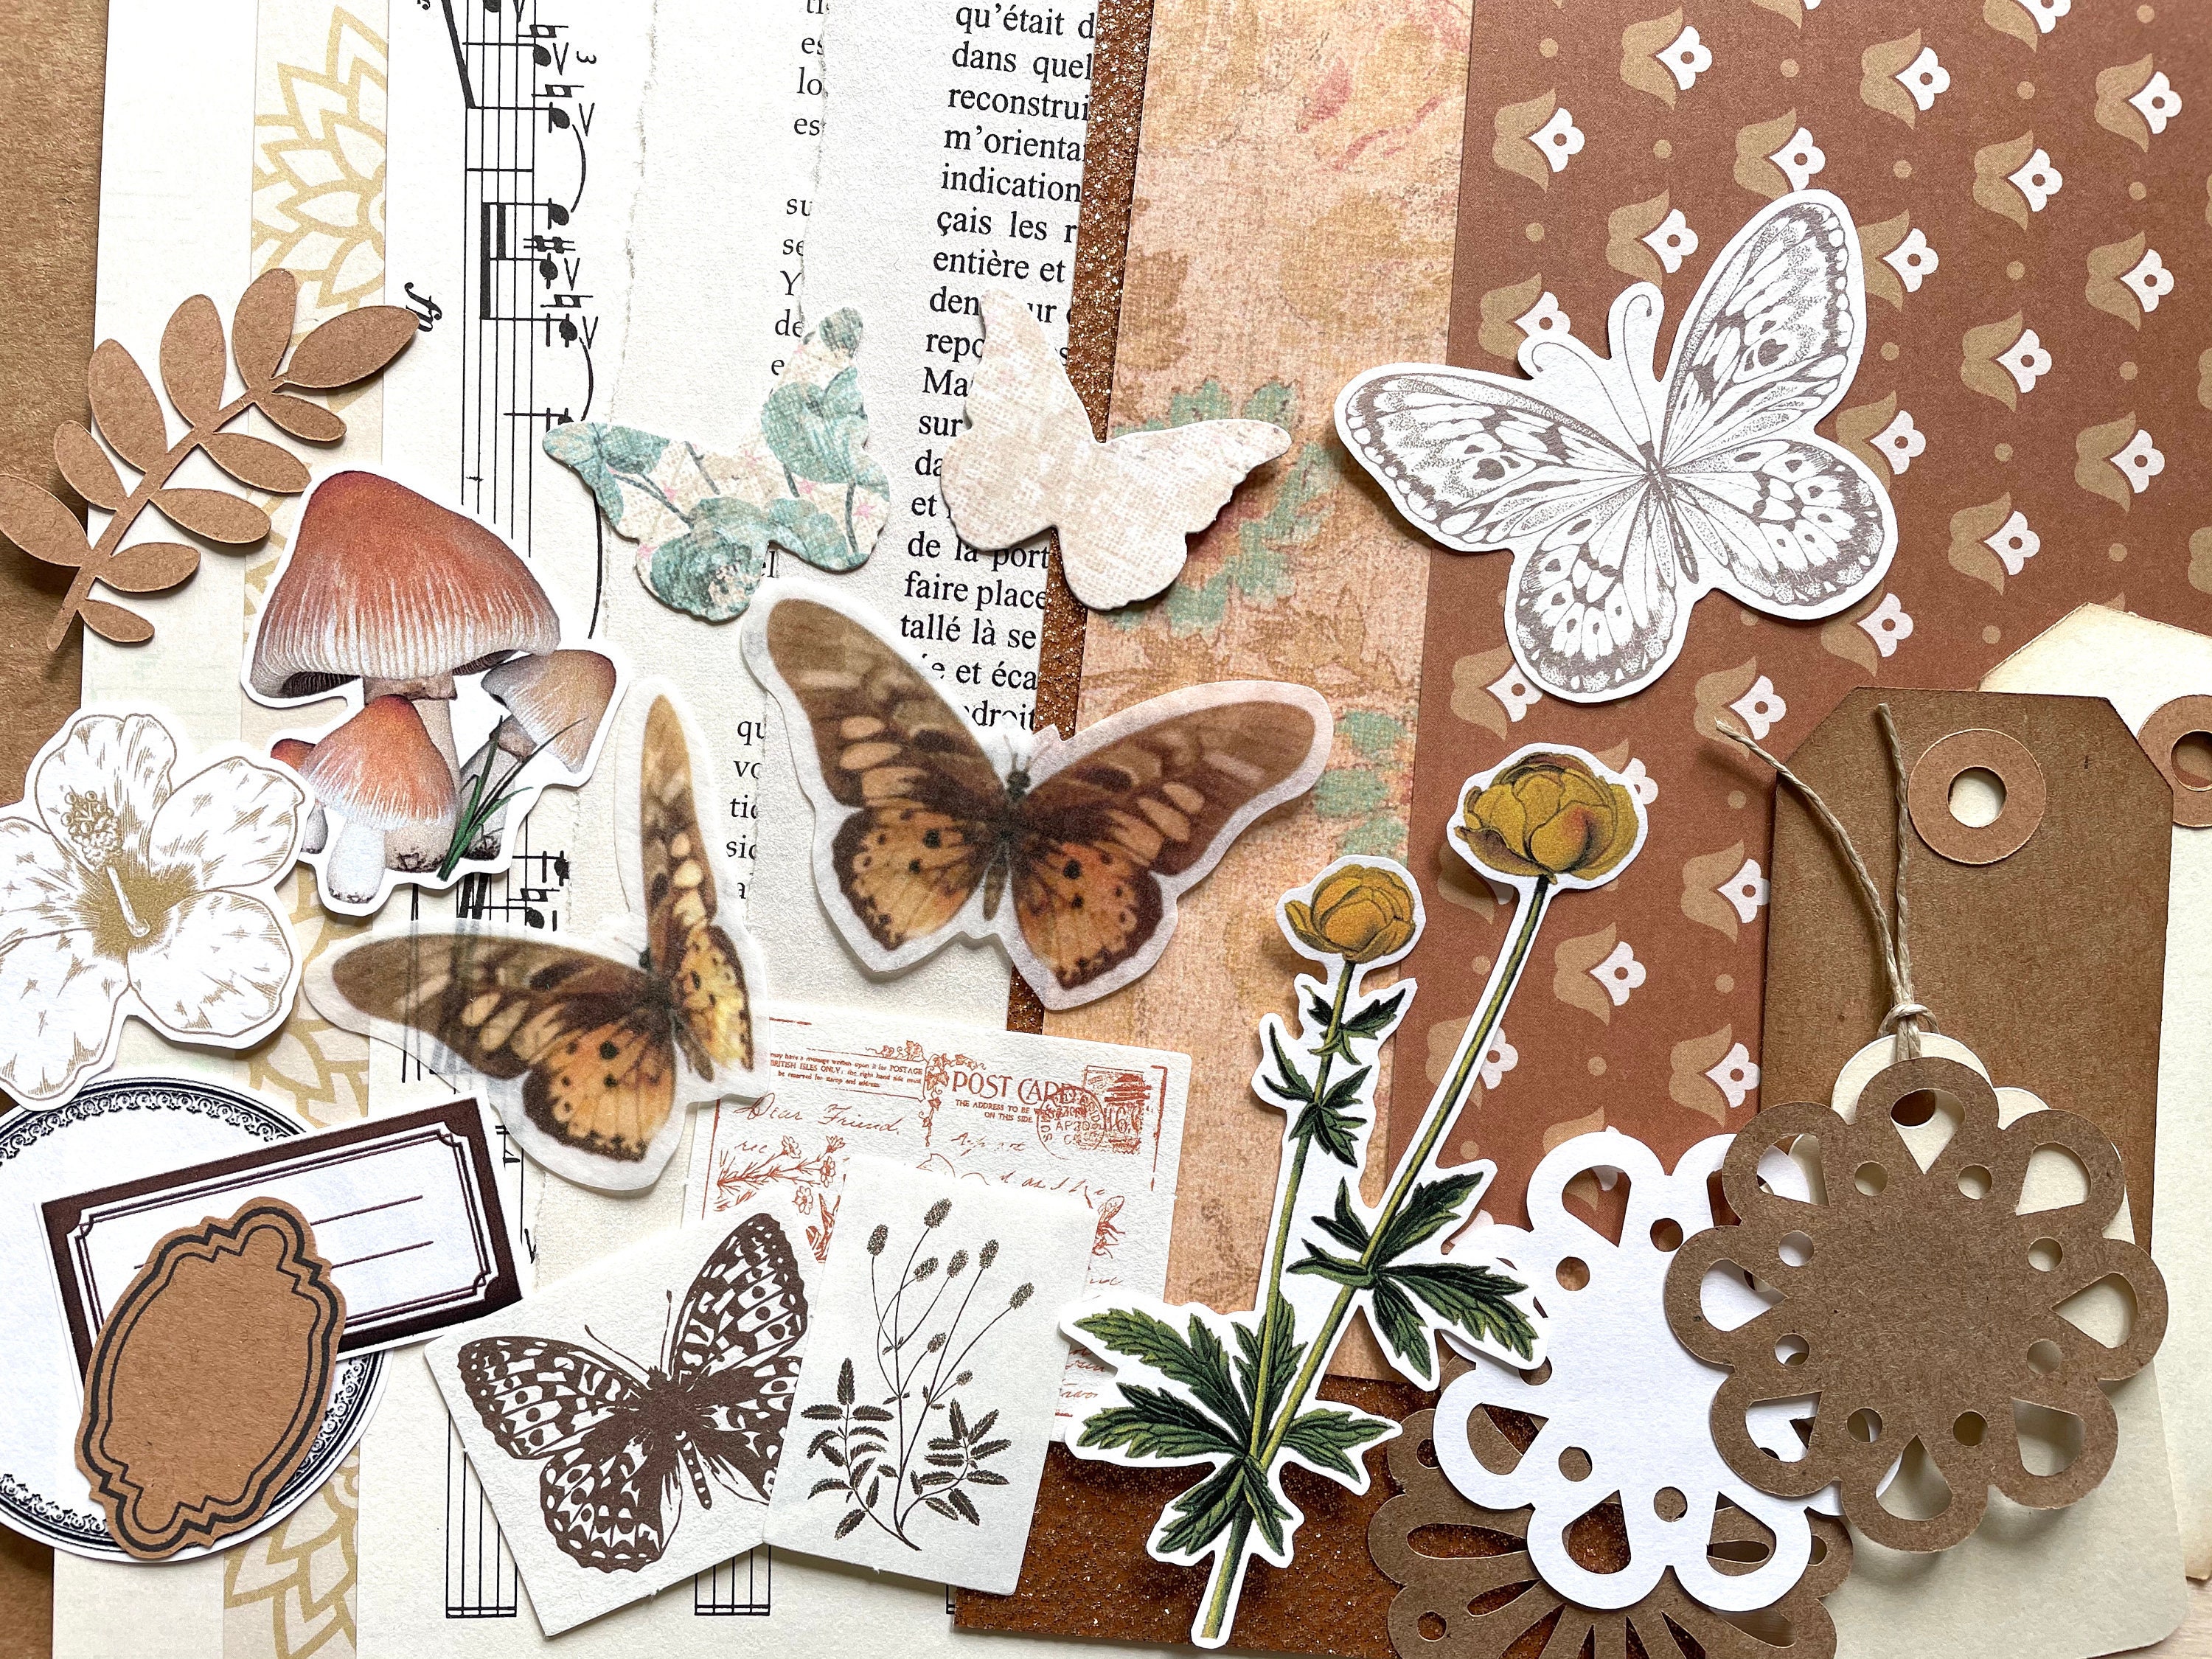 60pcs Vintage Materials Mini Book Butterfly Flower DIY Scrapbooking Diary  Creative Stationery Collage Photo Album Craft Paper